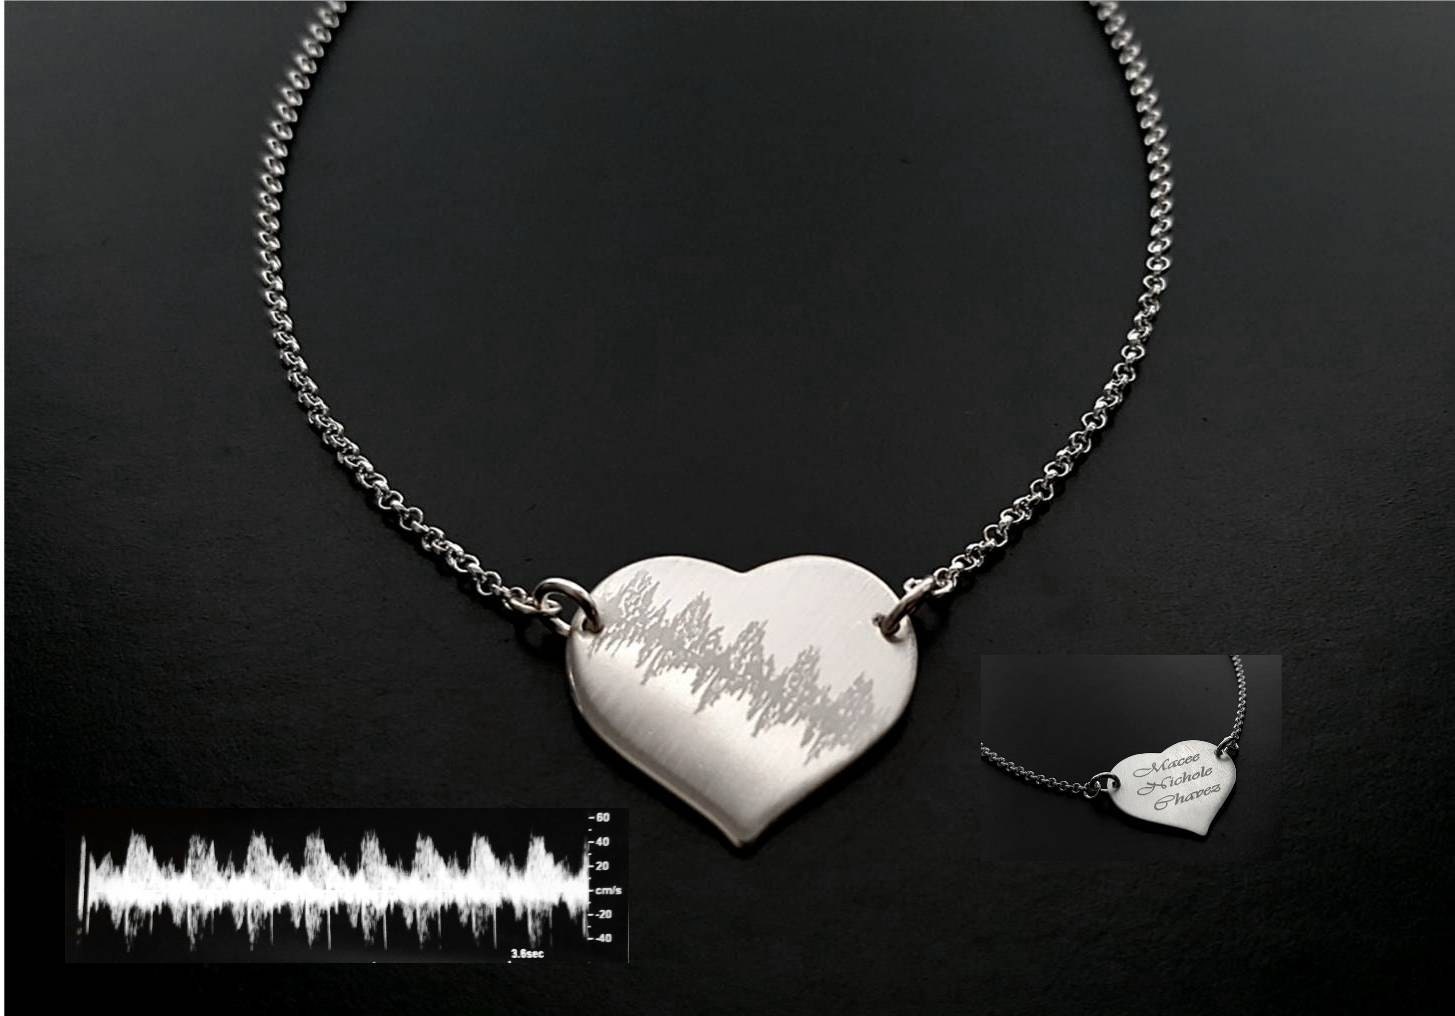 heartbeat necklace meaning